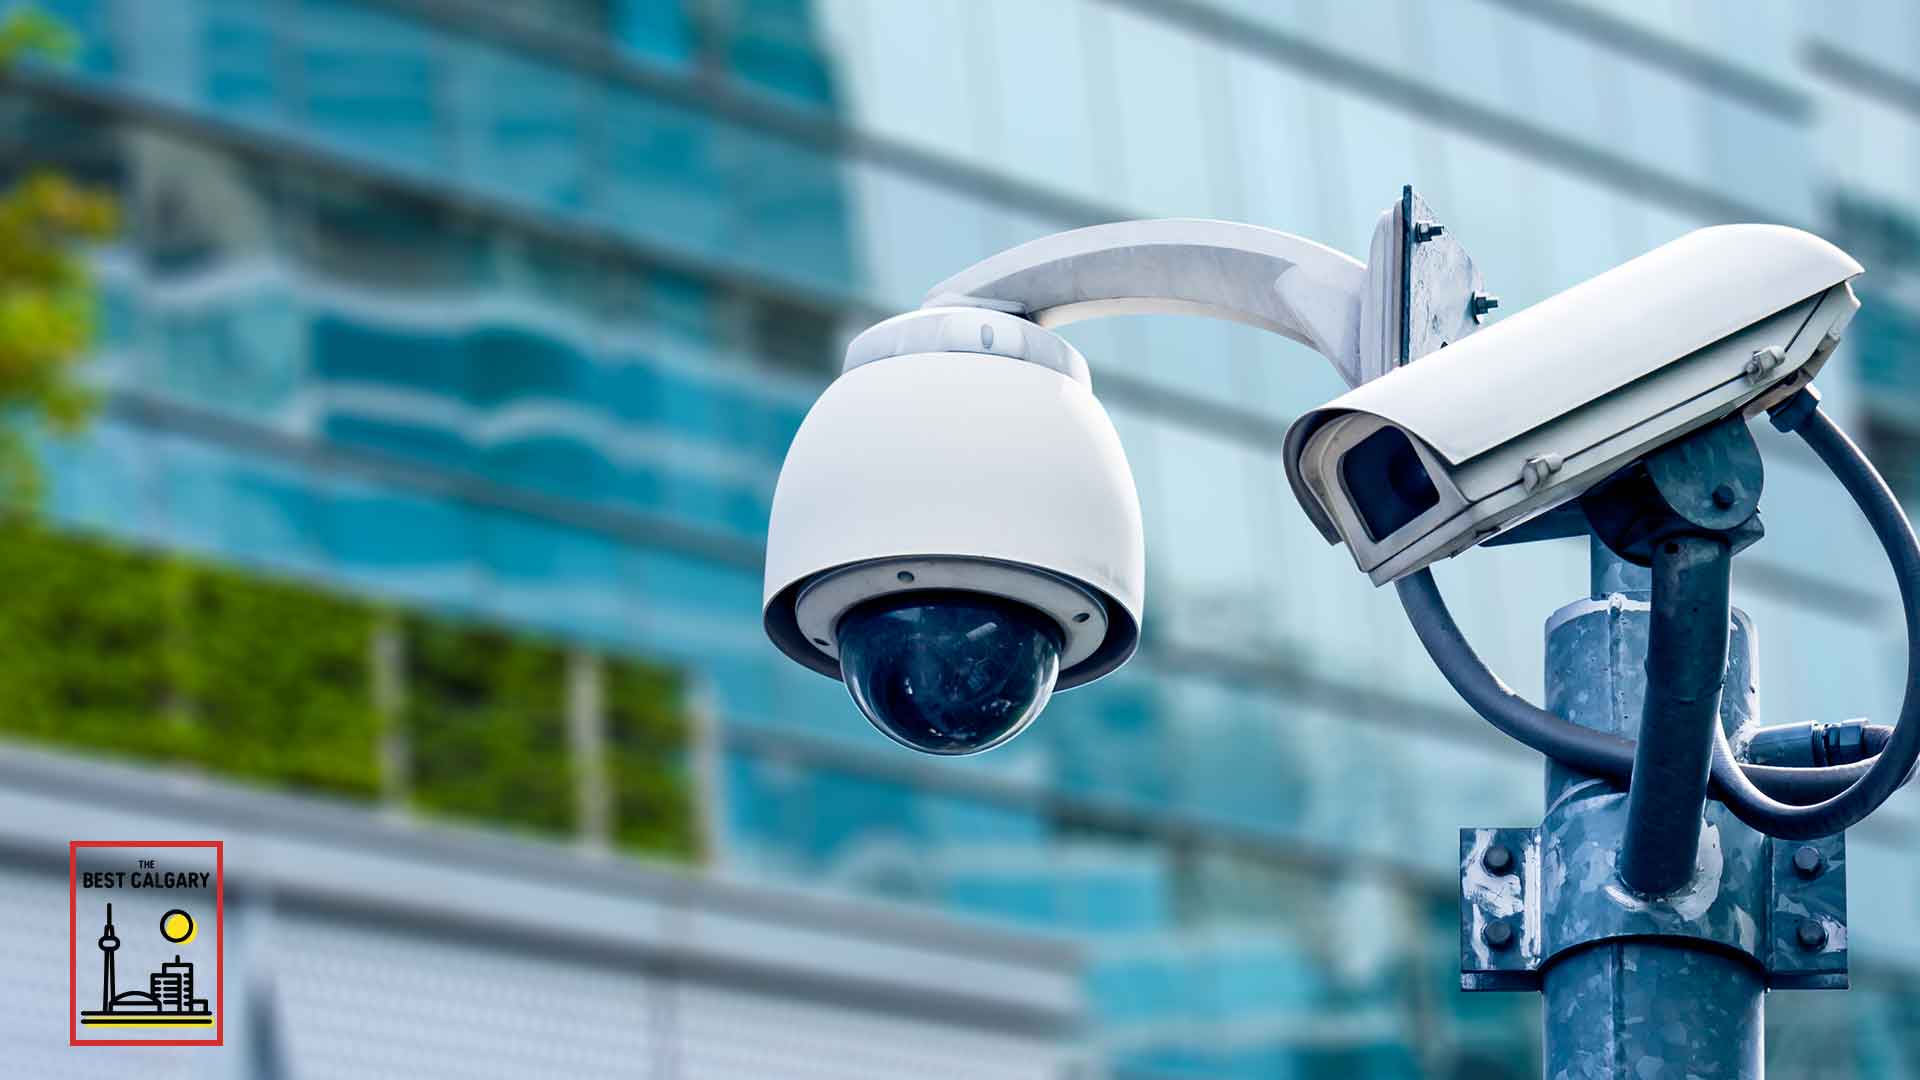 What is analog CCTV